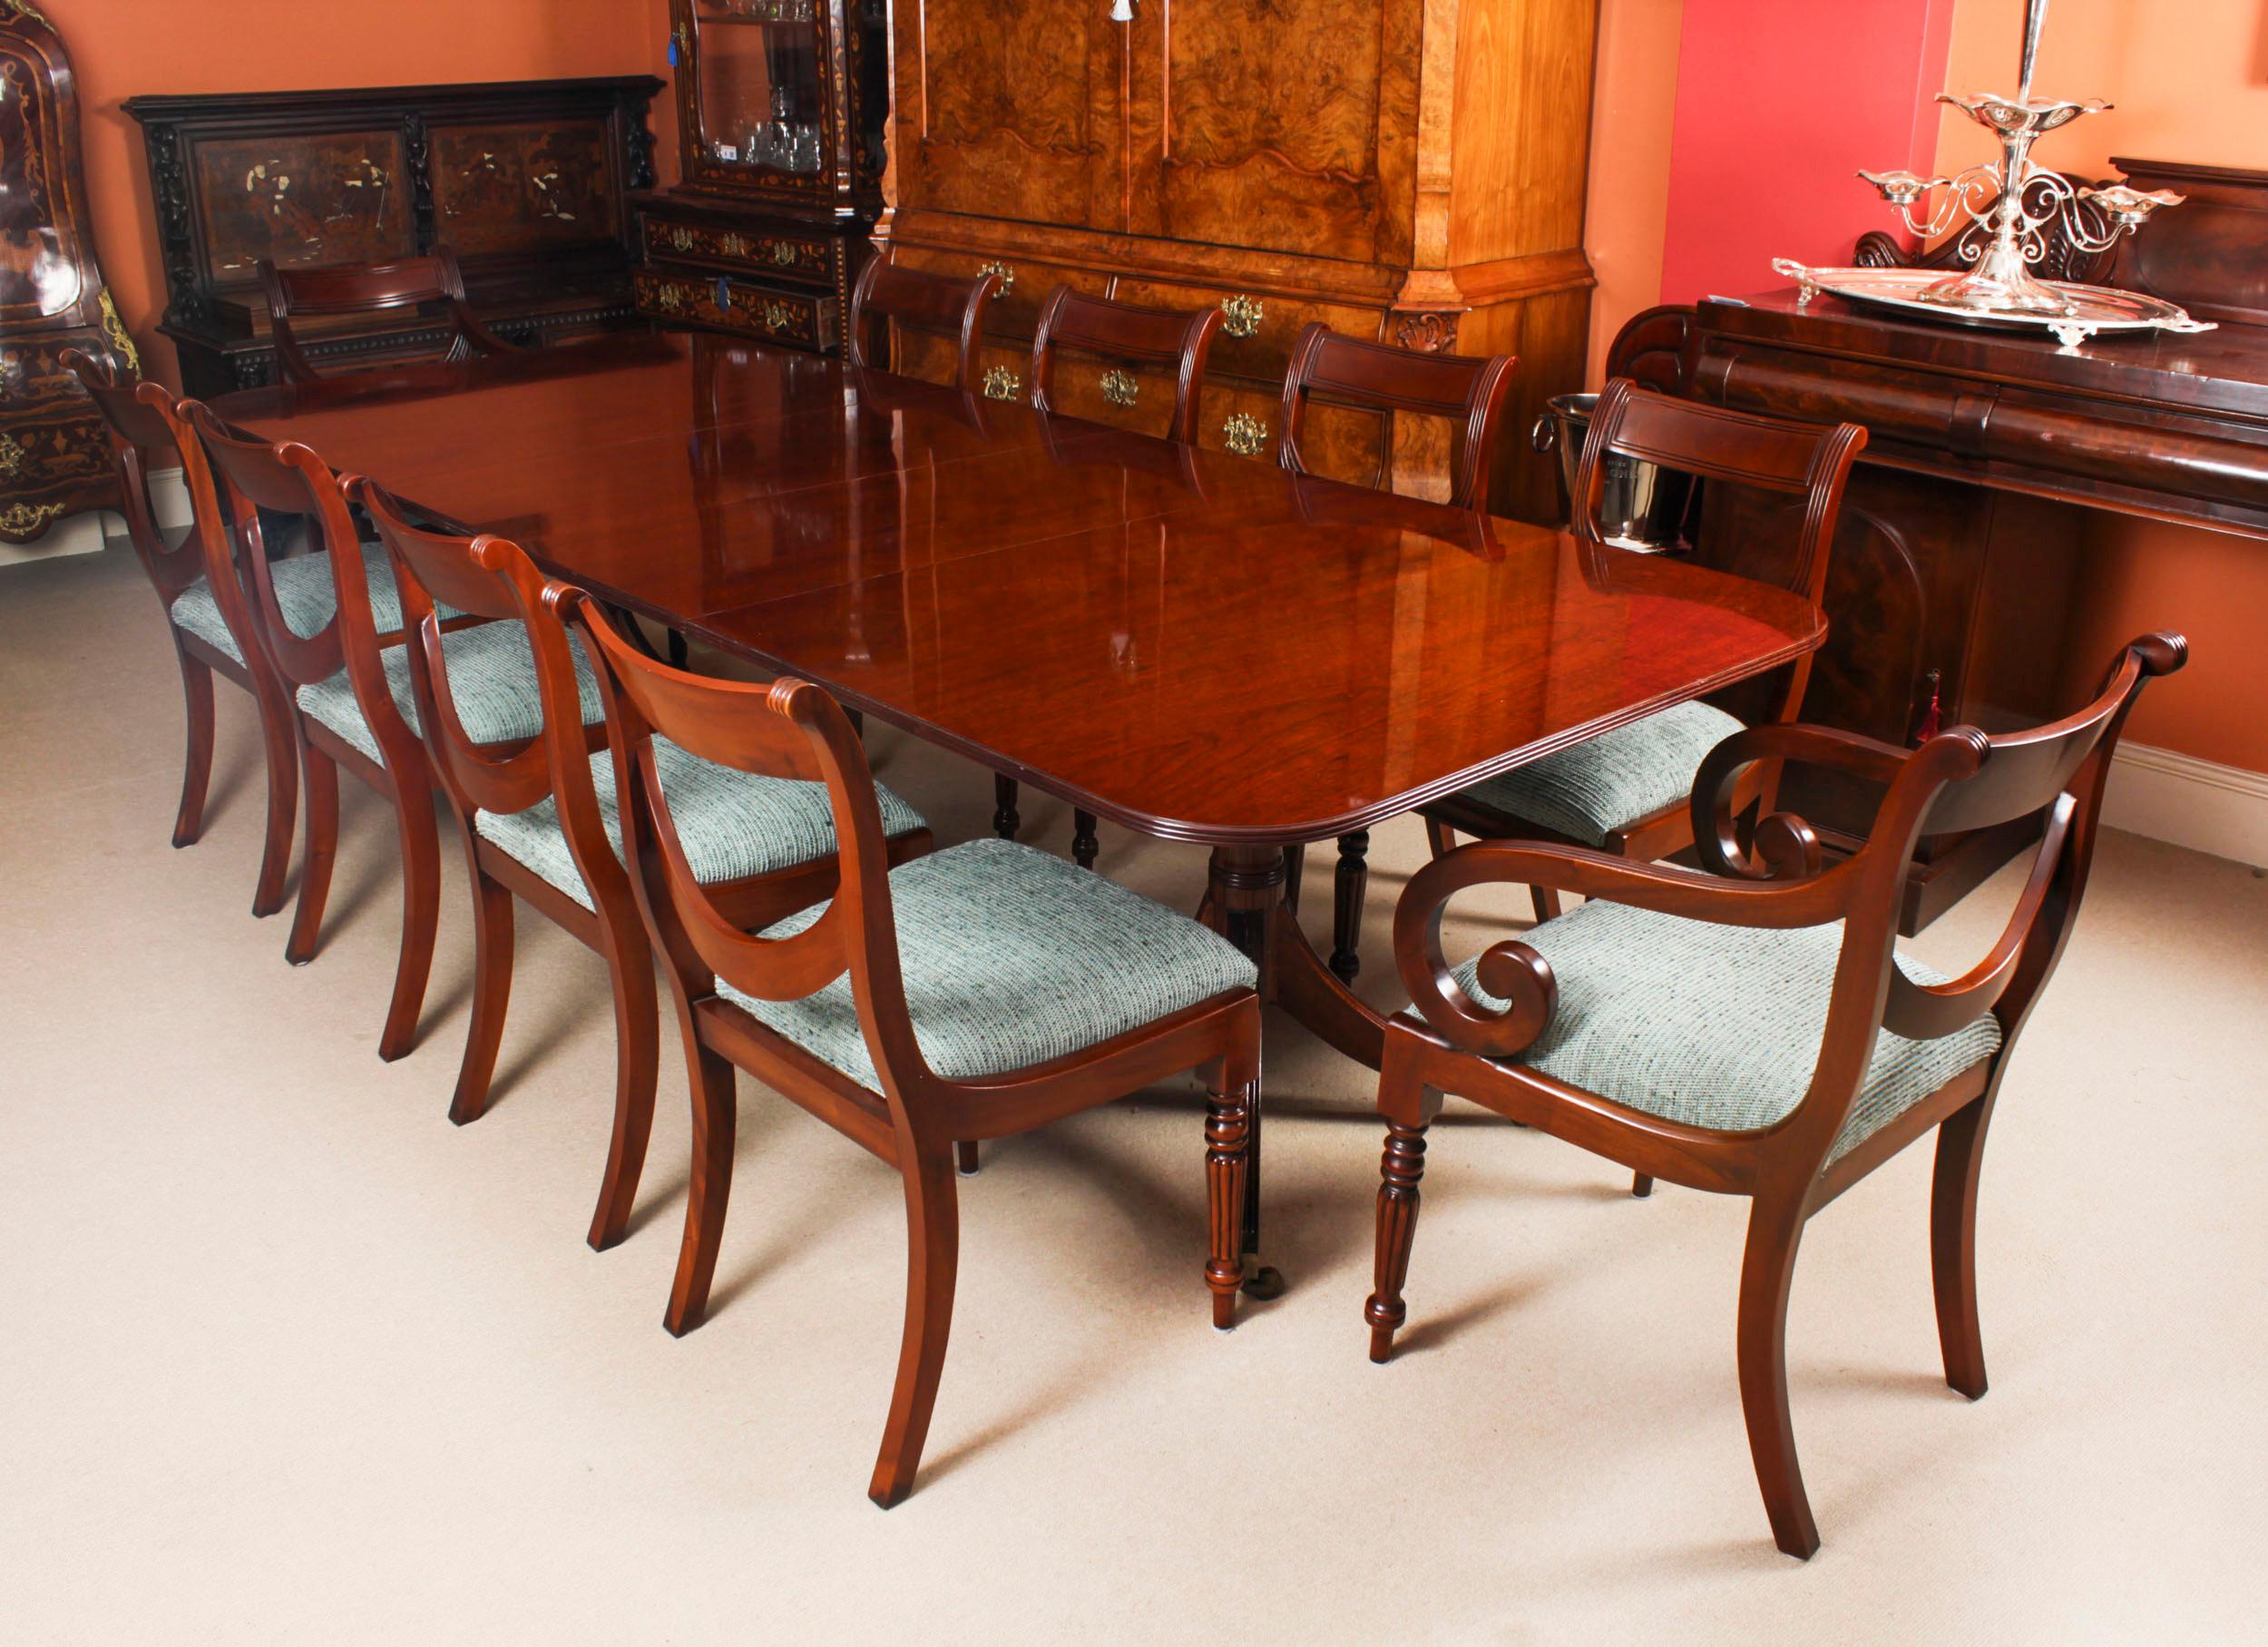 Vintage Regency Revival Dining Table and 10 Chairs by William Tillman 20th C 15